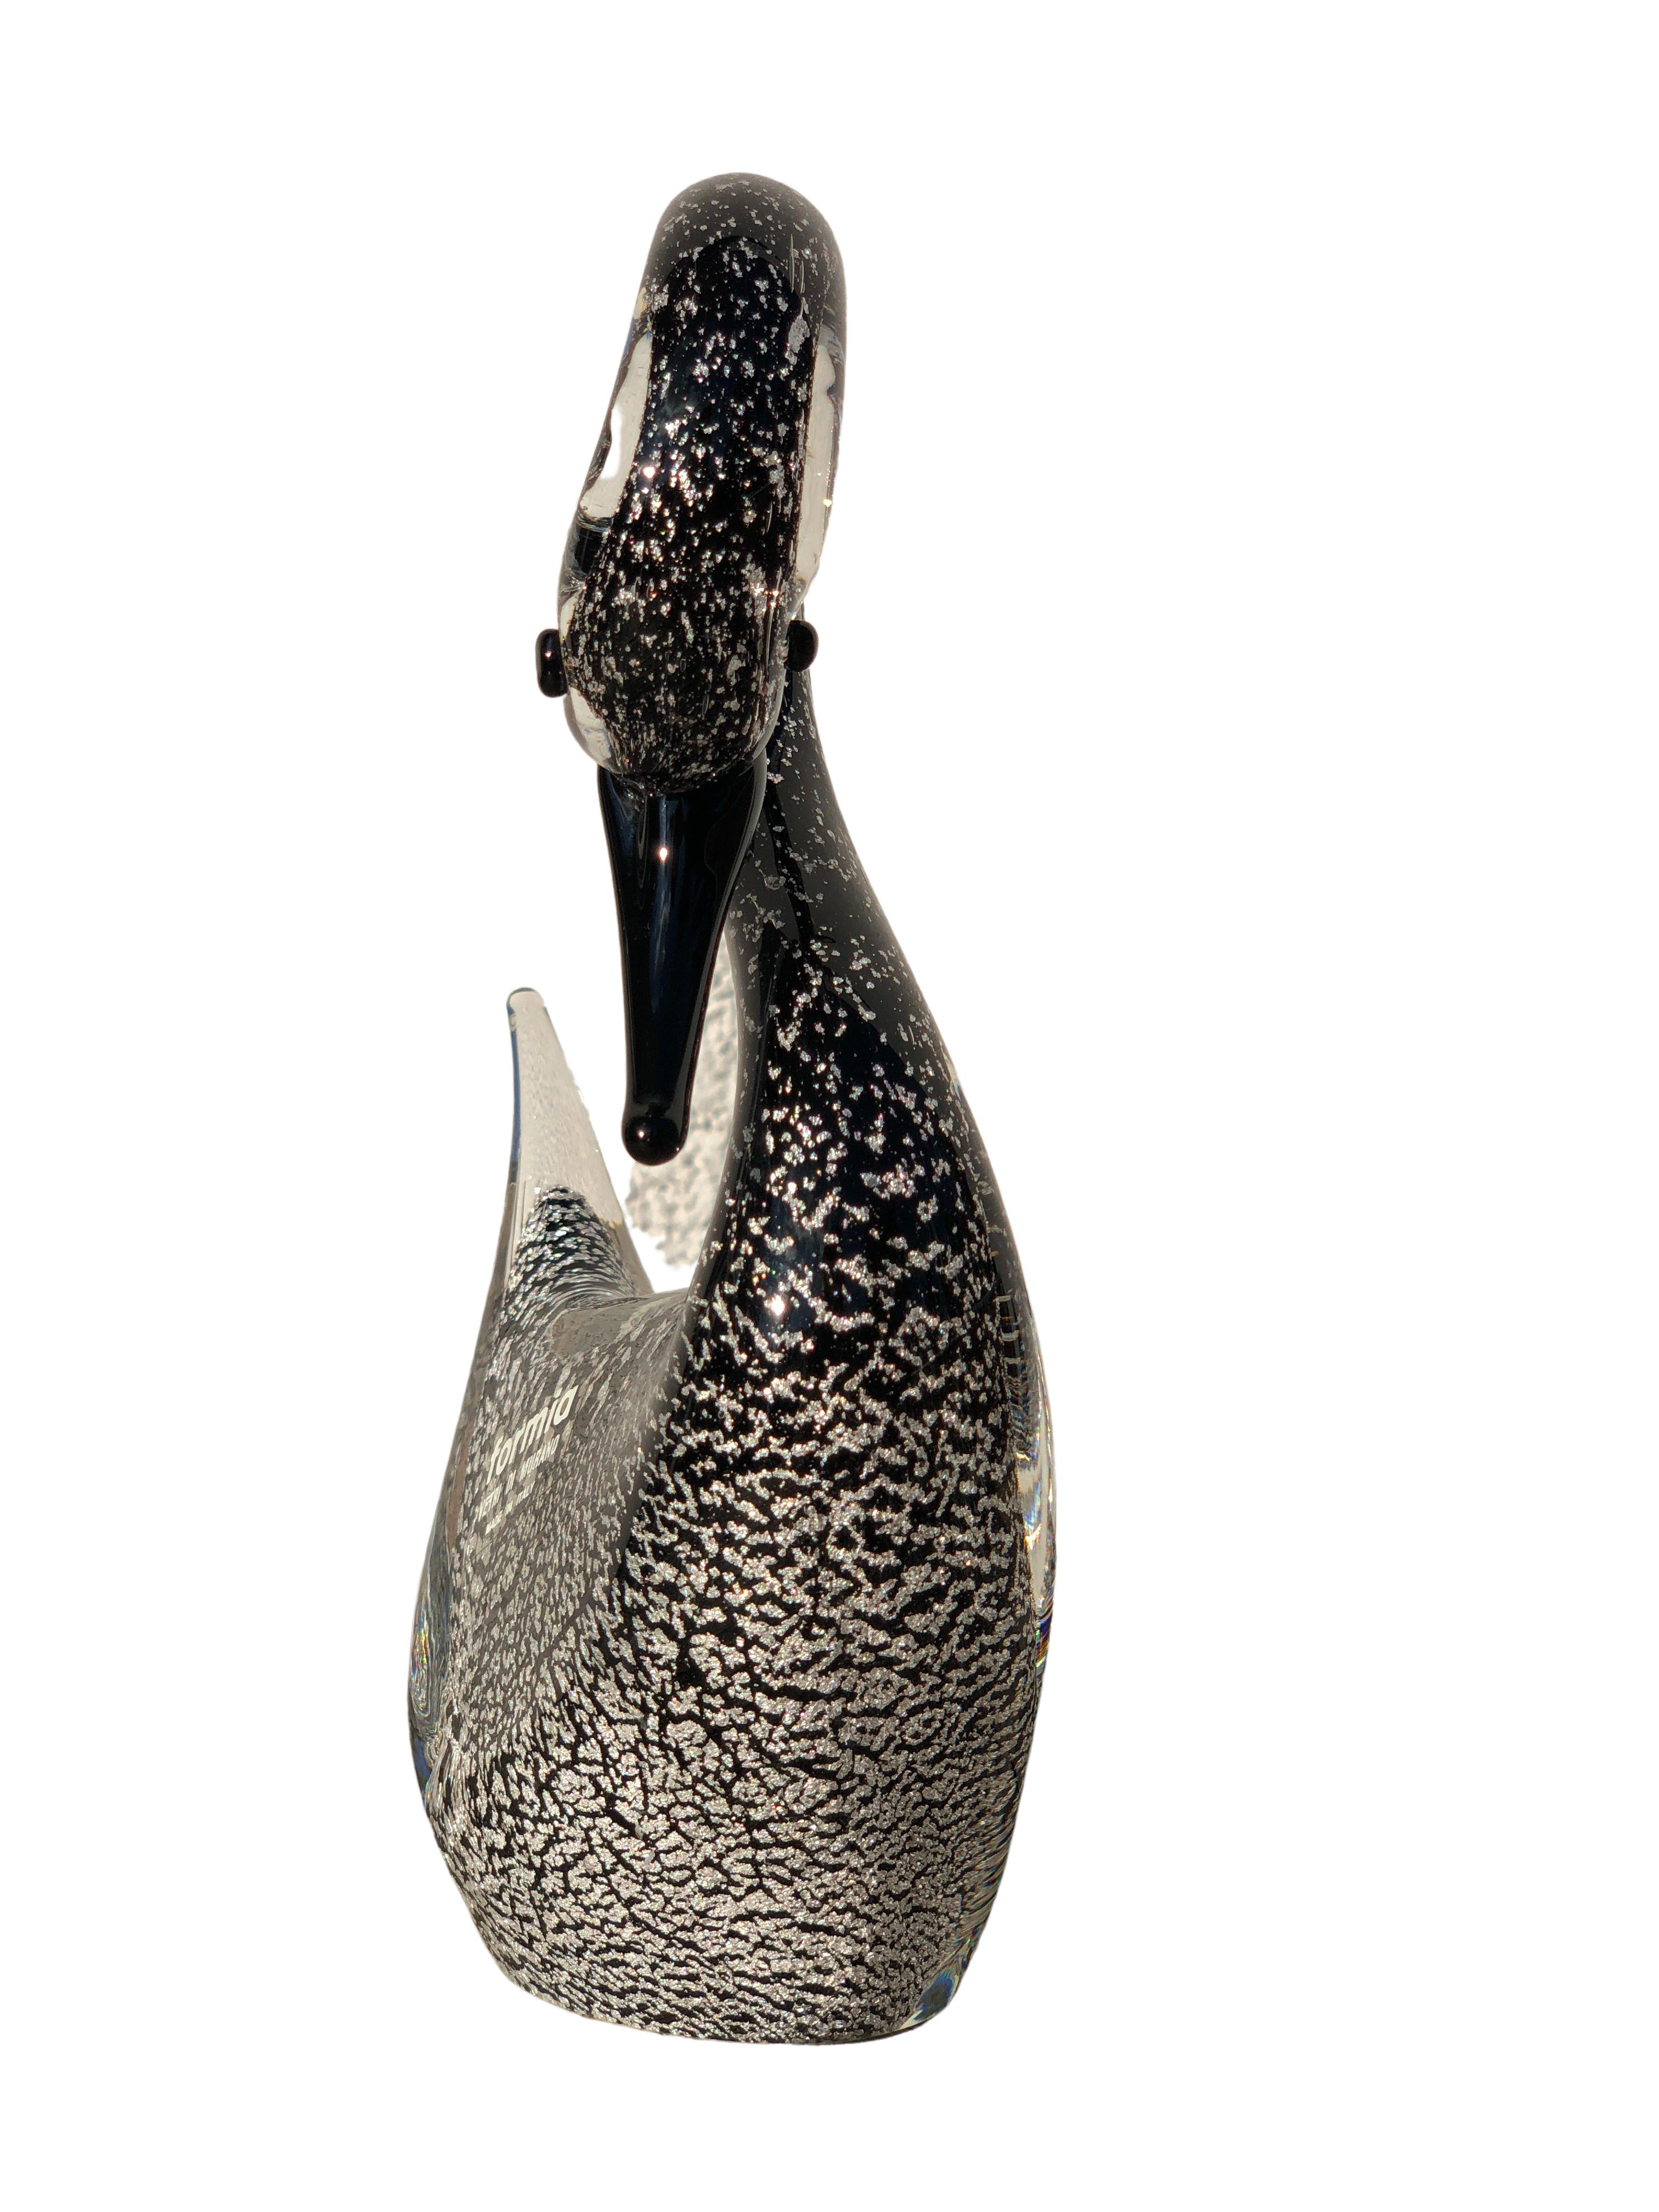 Hand-Crafted Murano Art Glass Silver Flecked Swan Figurine by Formia, Italy, 1960s For Sale